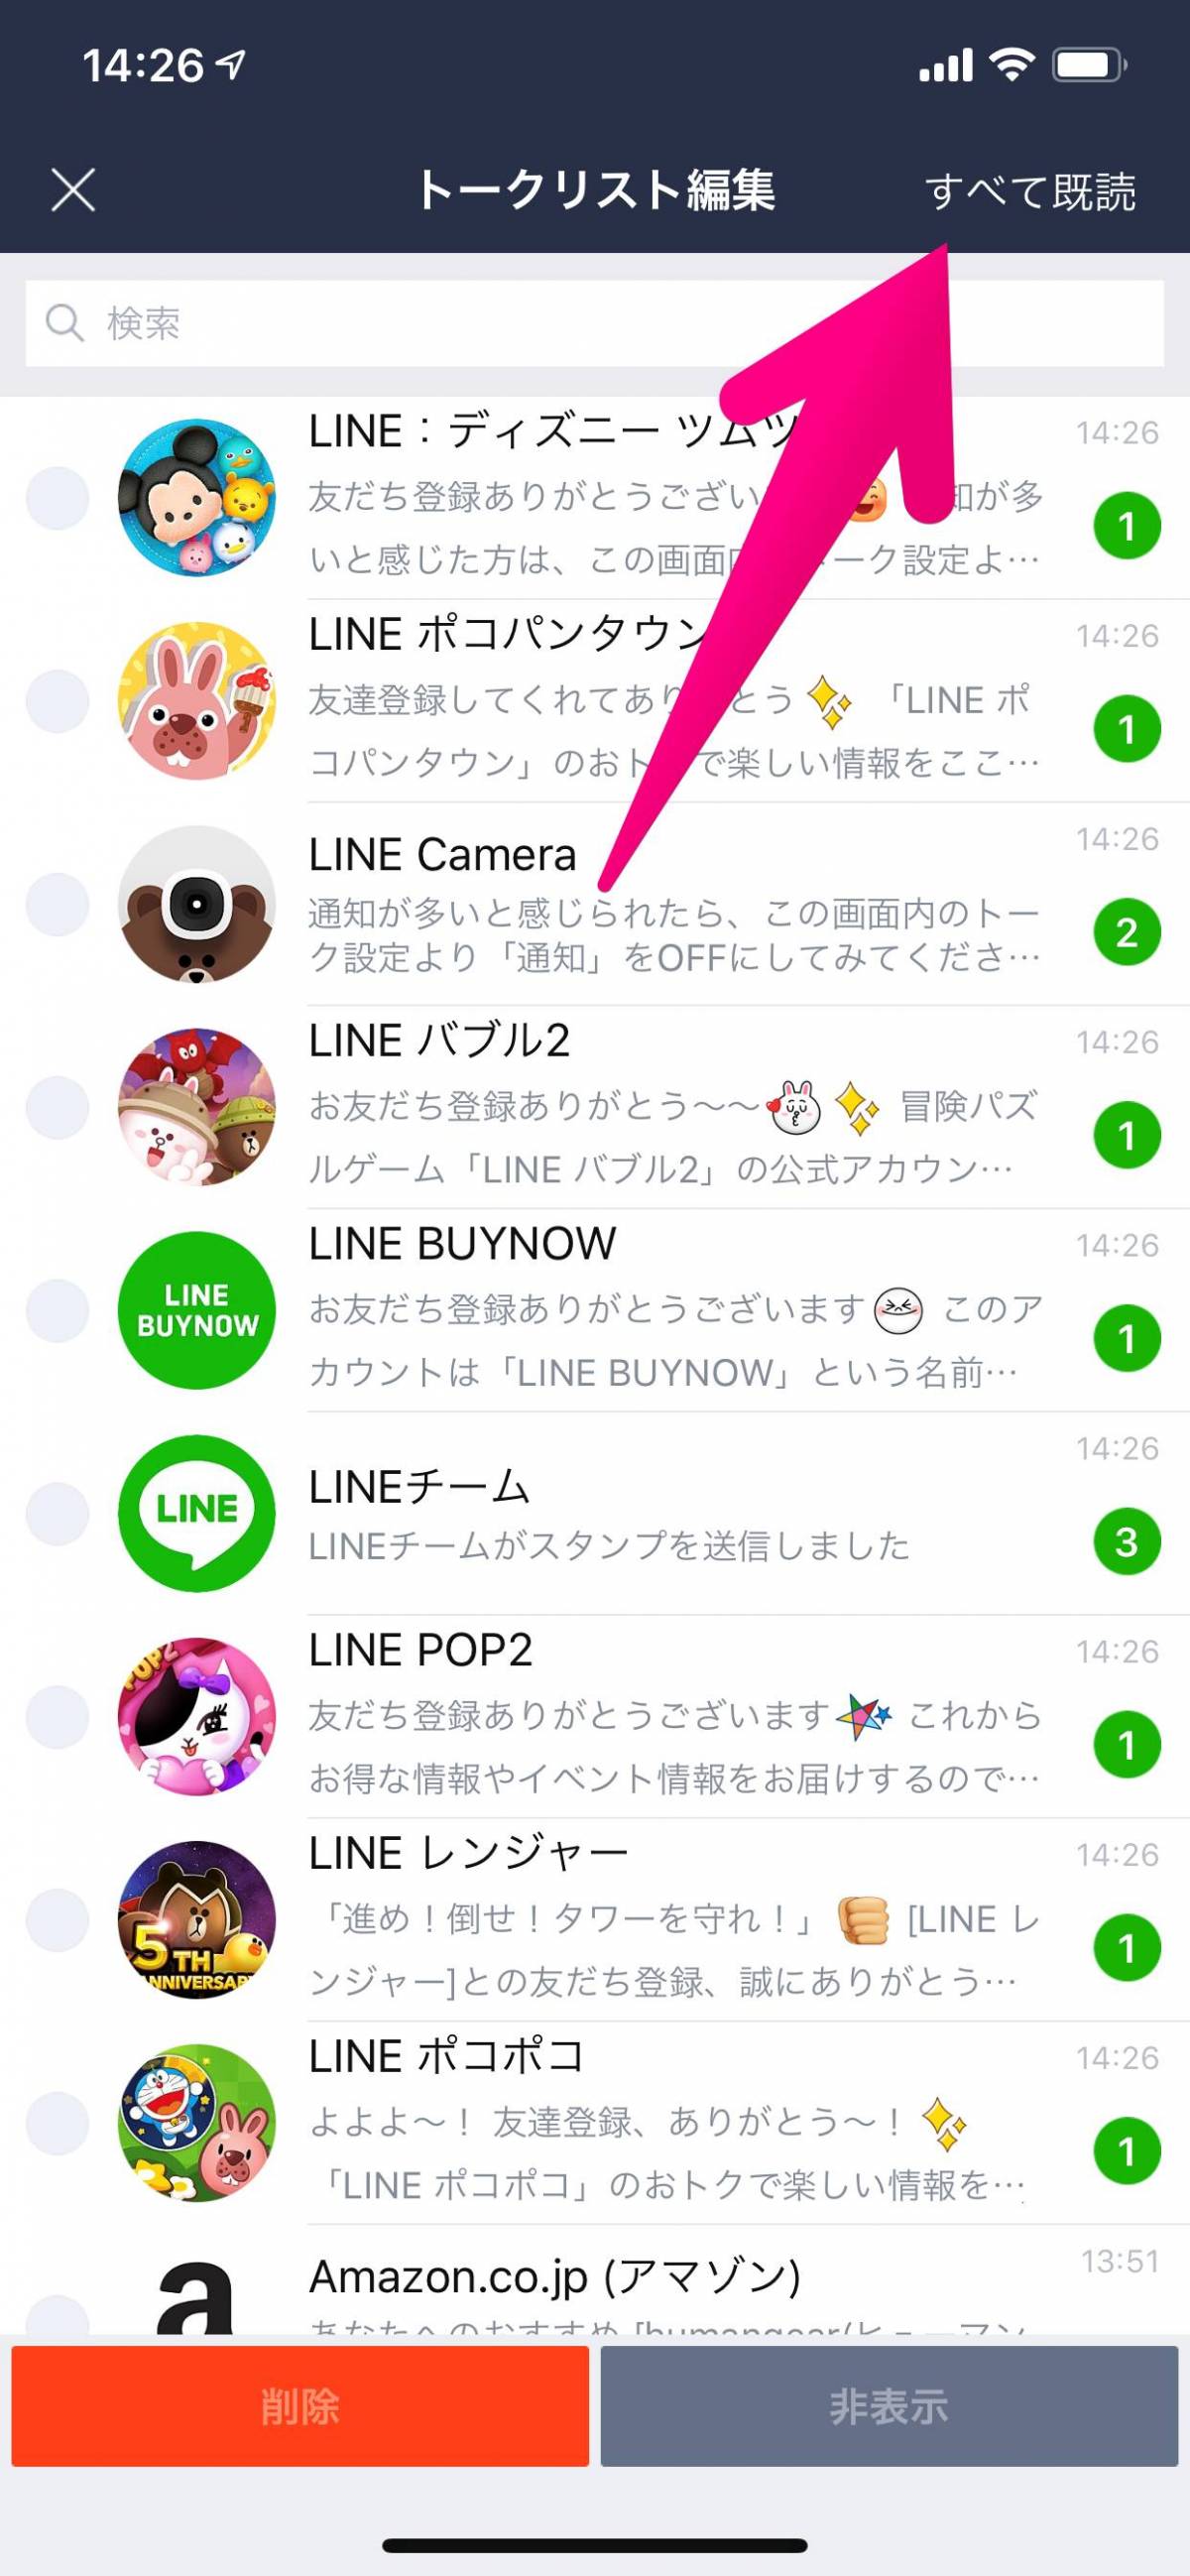 Line 溜まった未読メッセージを一括で既読にする方法 Iphone Android Pc Appliv Topics